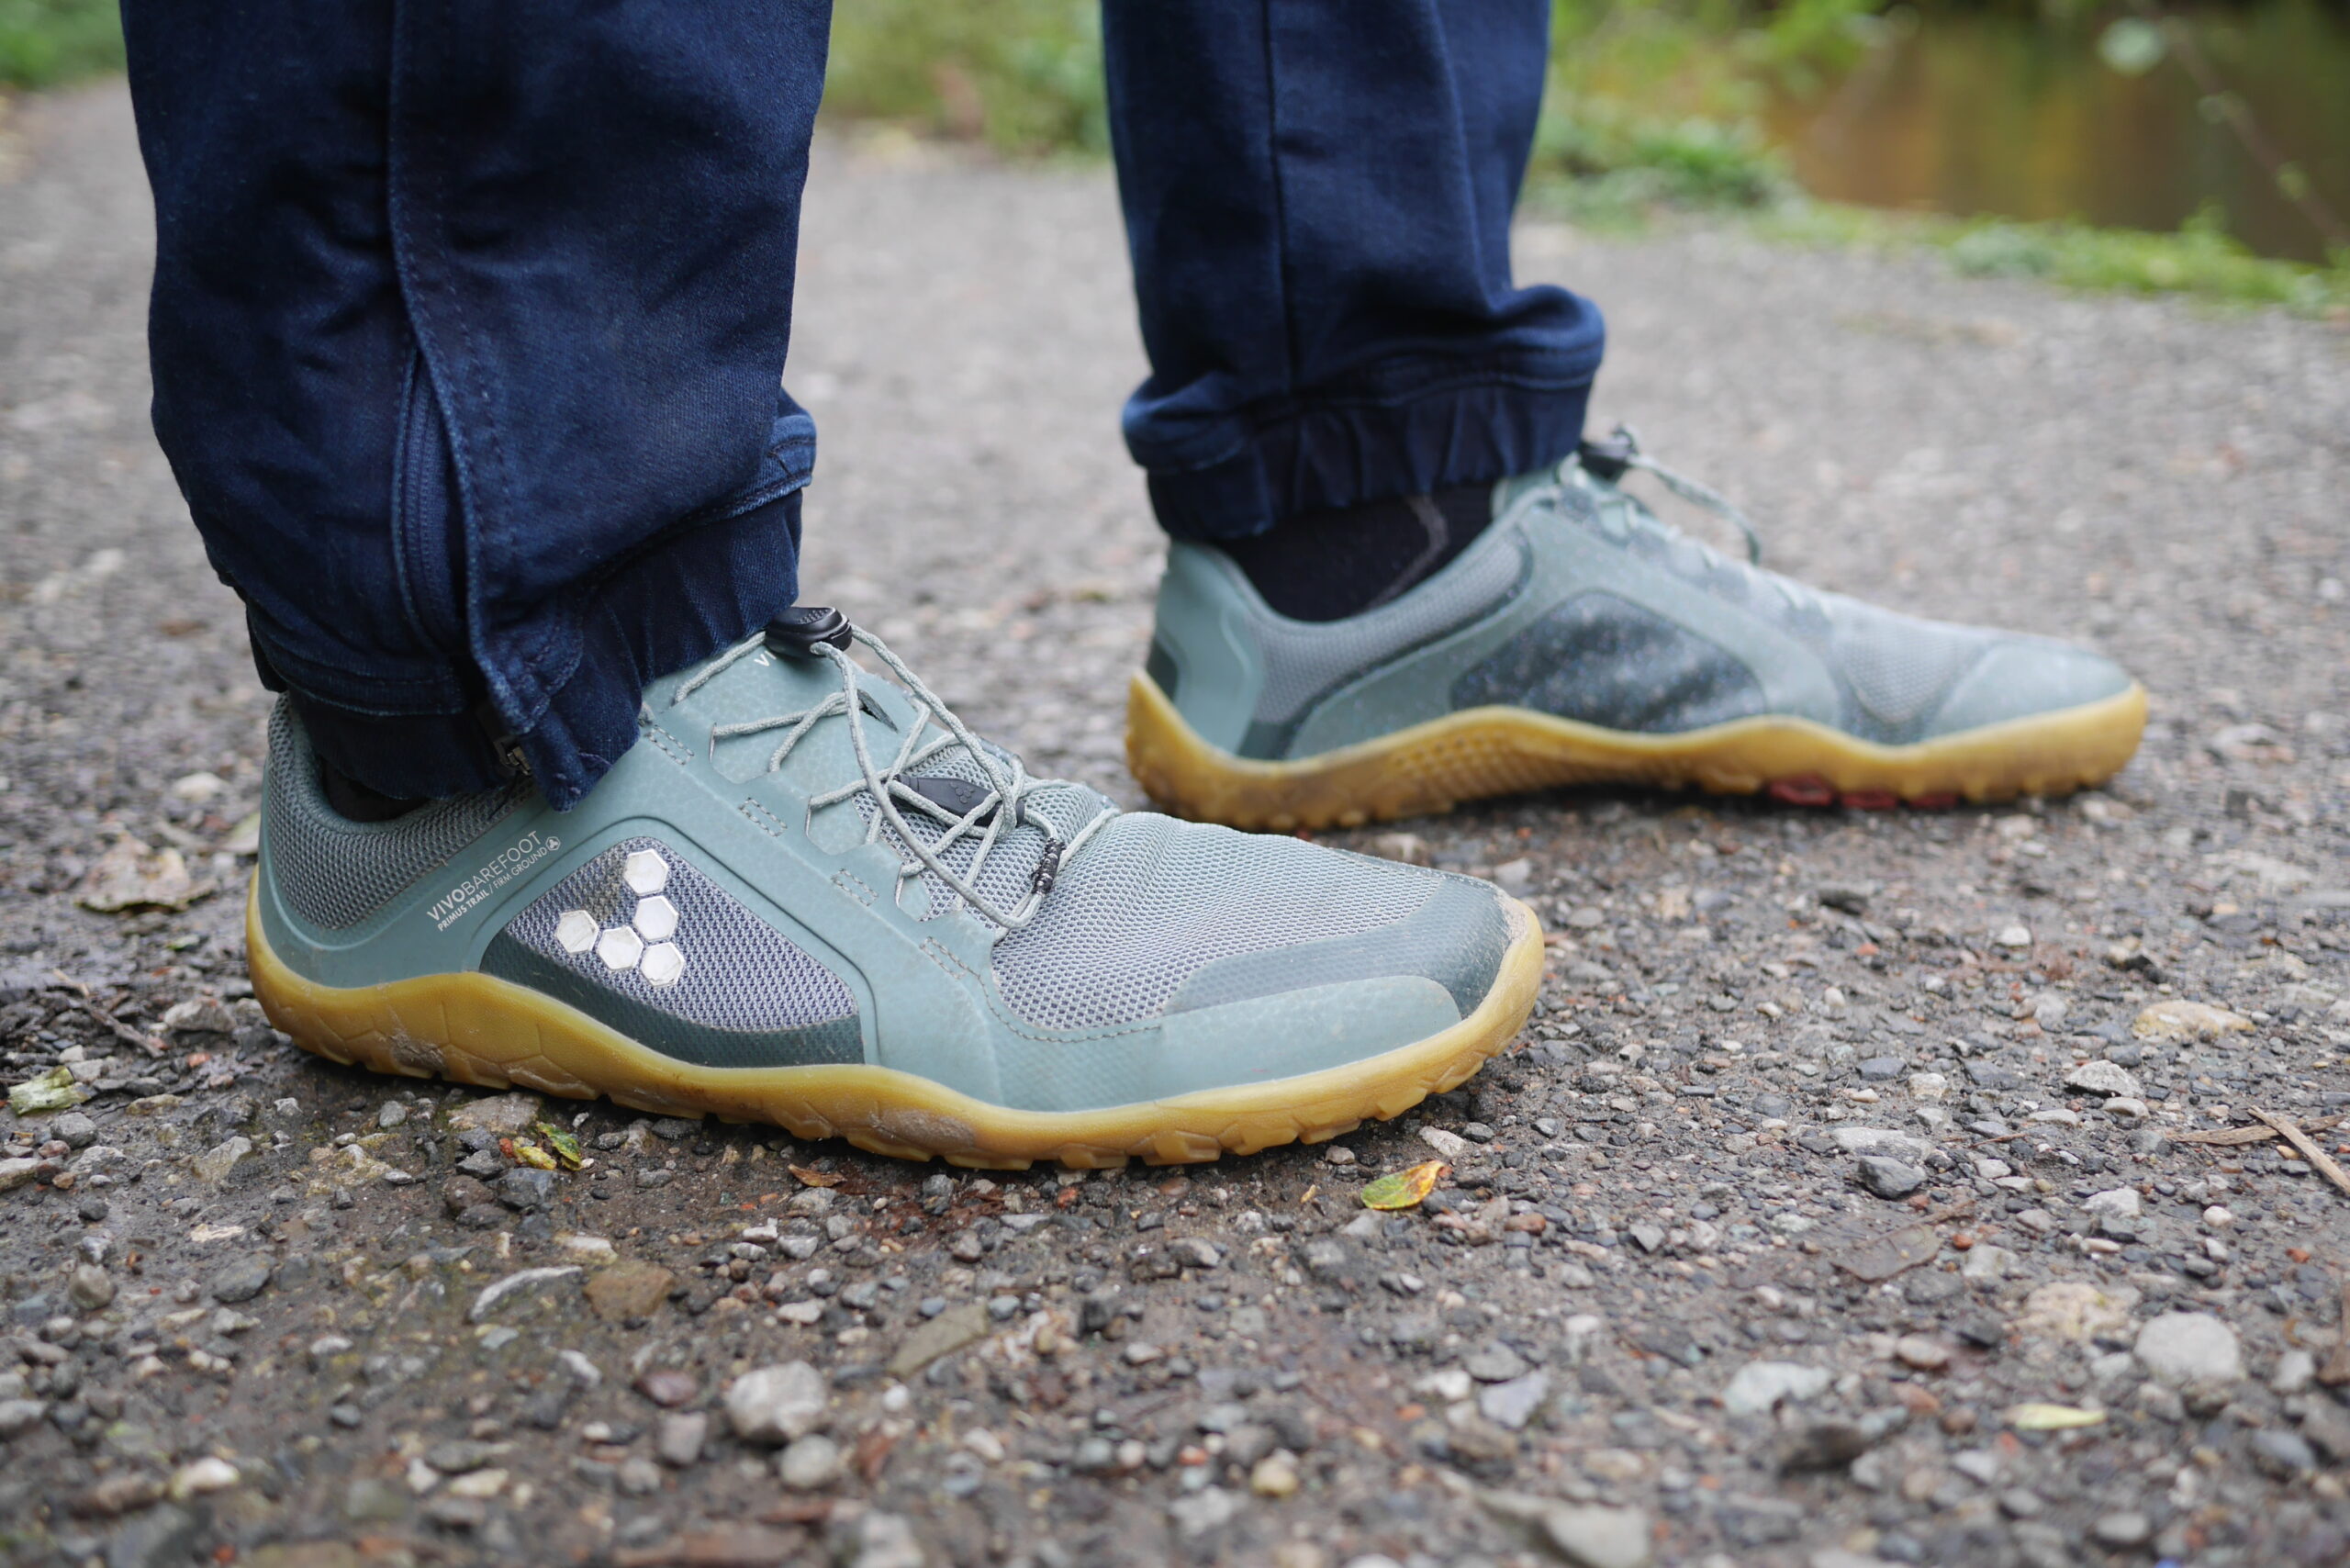 Vivobarefoot Primus Trail FG - Ideal for an active lifestyle?